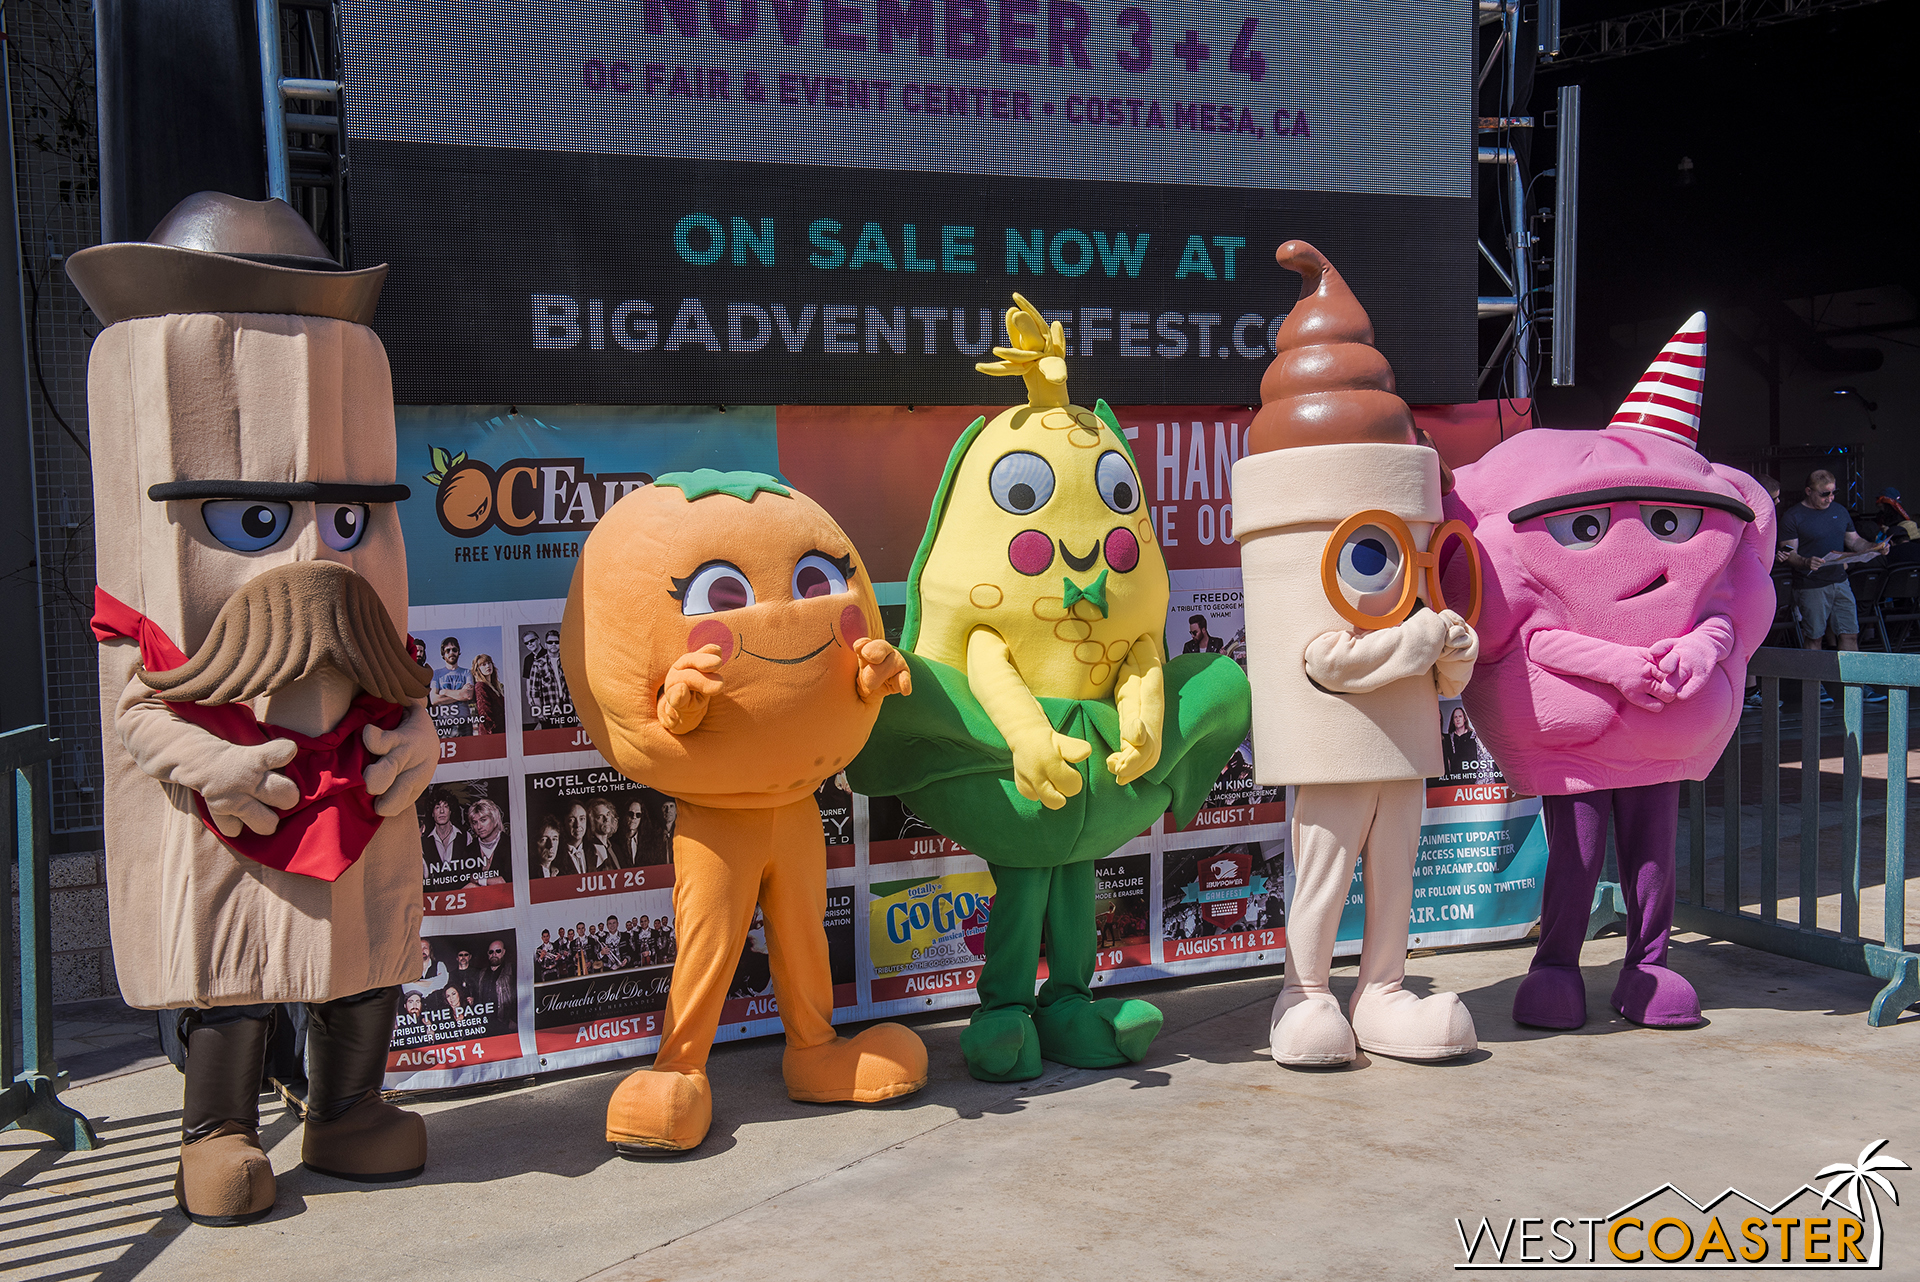  The Fair mascots are on hand for photos throughout the day. 